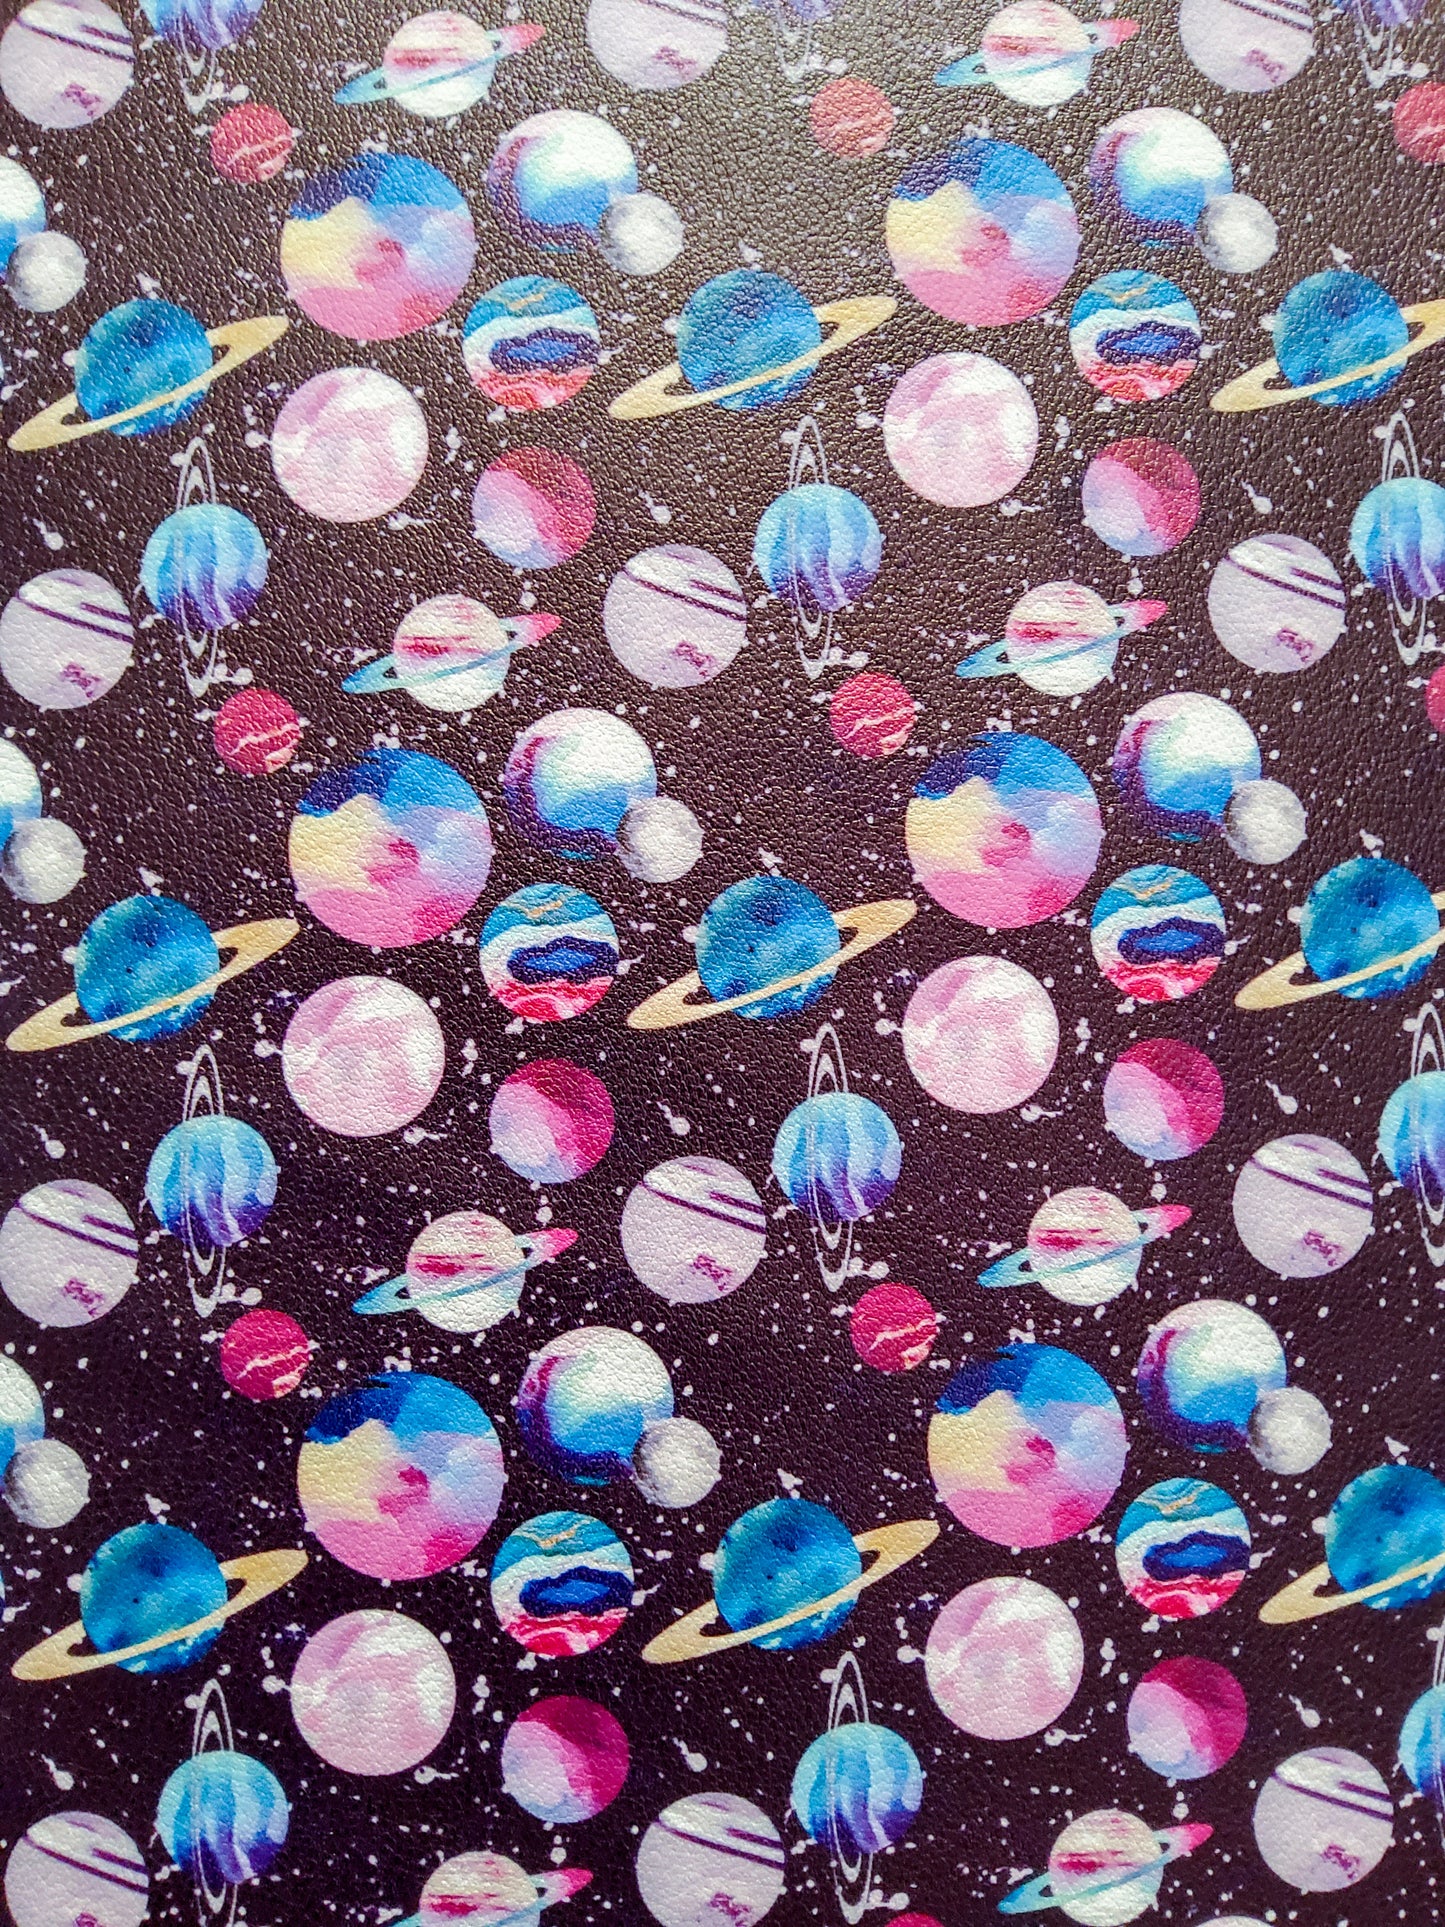 Space 9x12 faux leather sheet